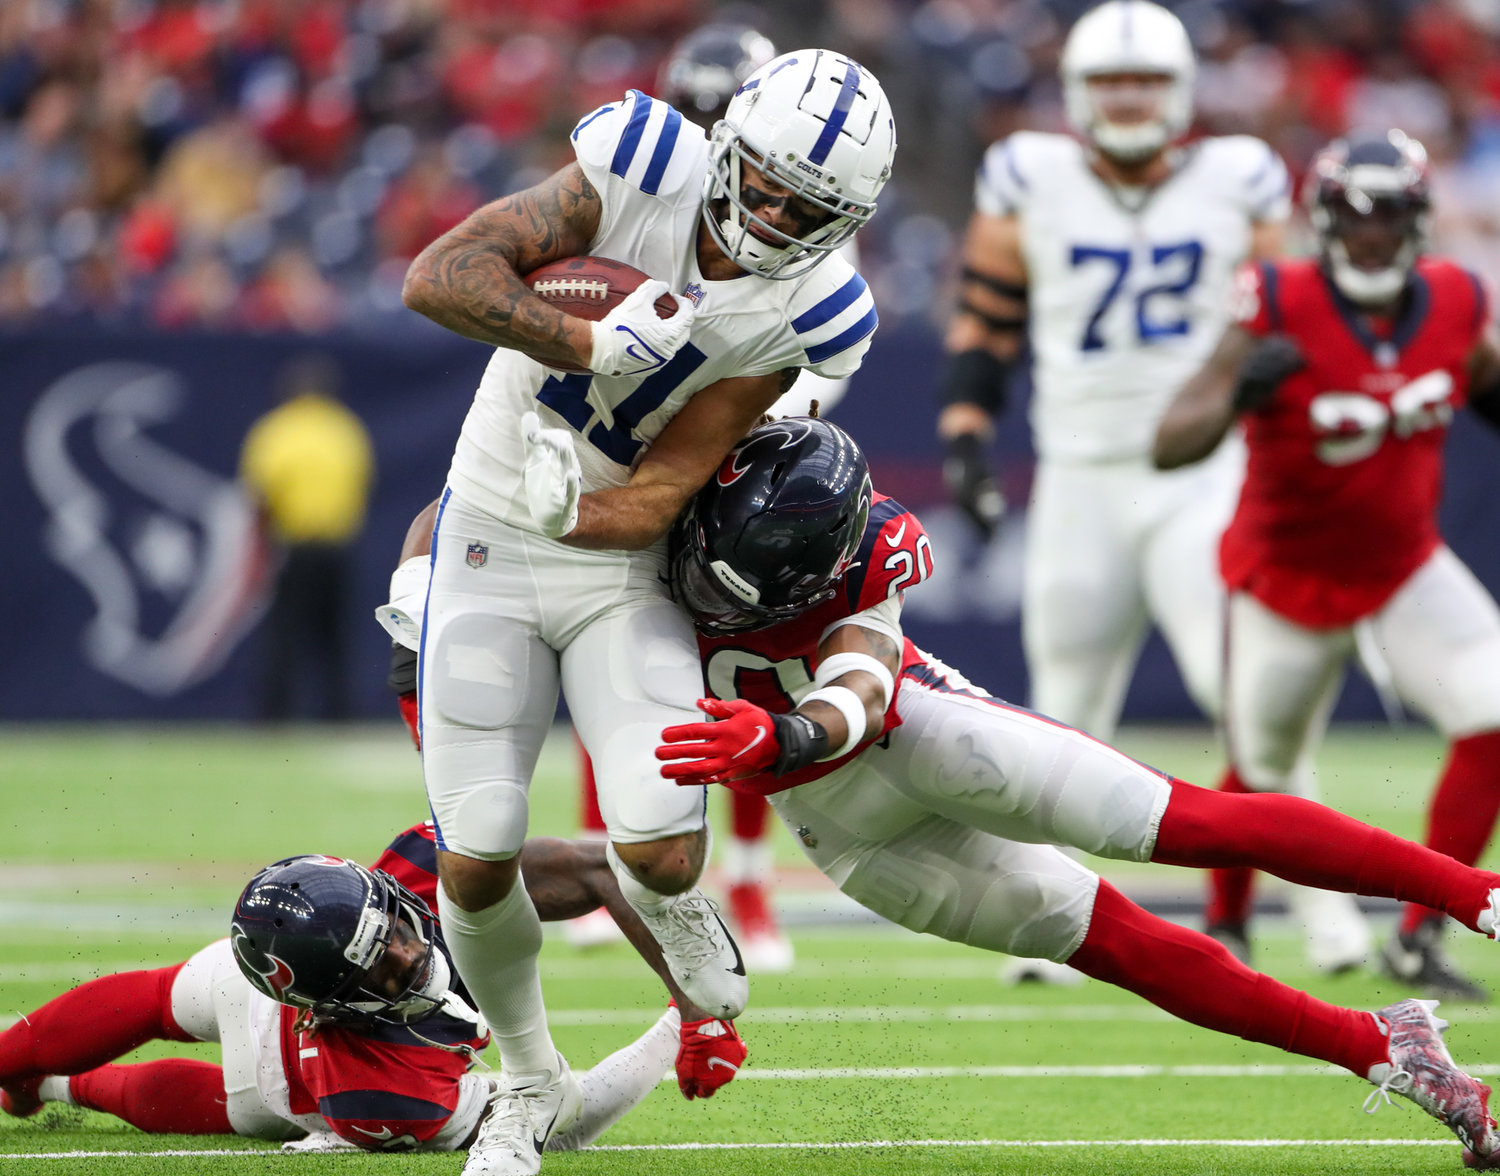 Houston Texans safety Justin Reid (20) tackles Indianapolis Colts wide receiver Michael Pittman Jr. (11) during an NFL game between the Texans and the Colts on December 5, 2021 in Houston, Texas.